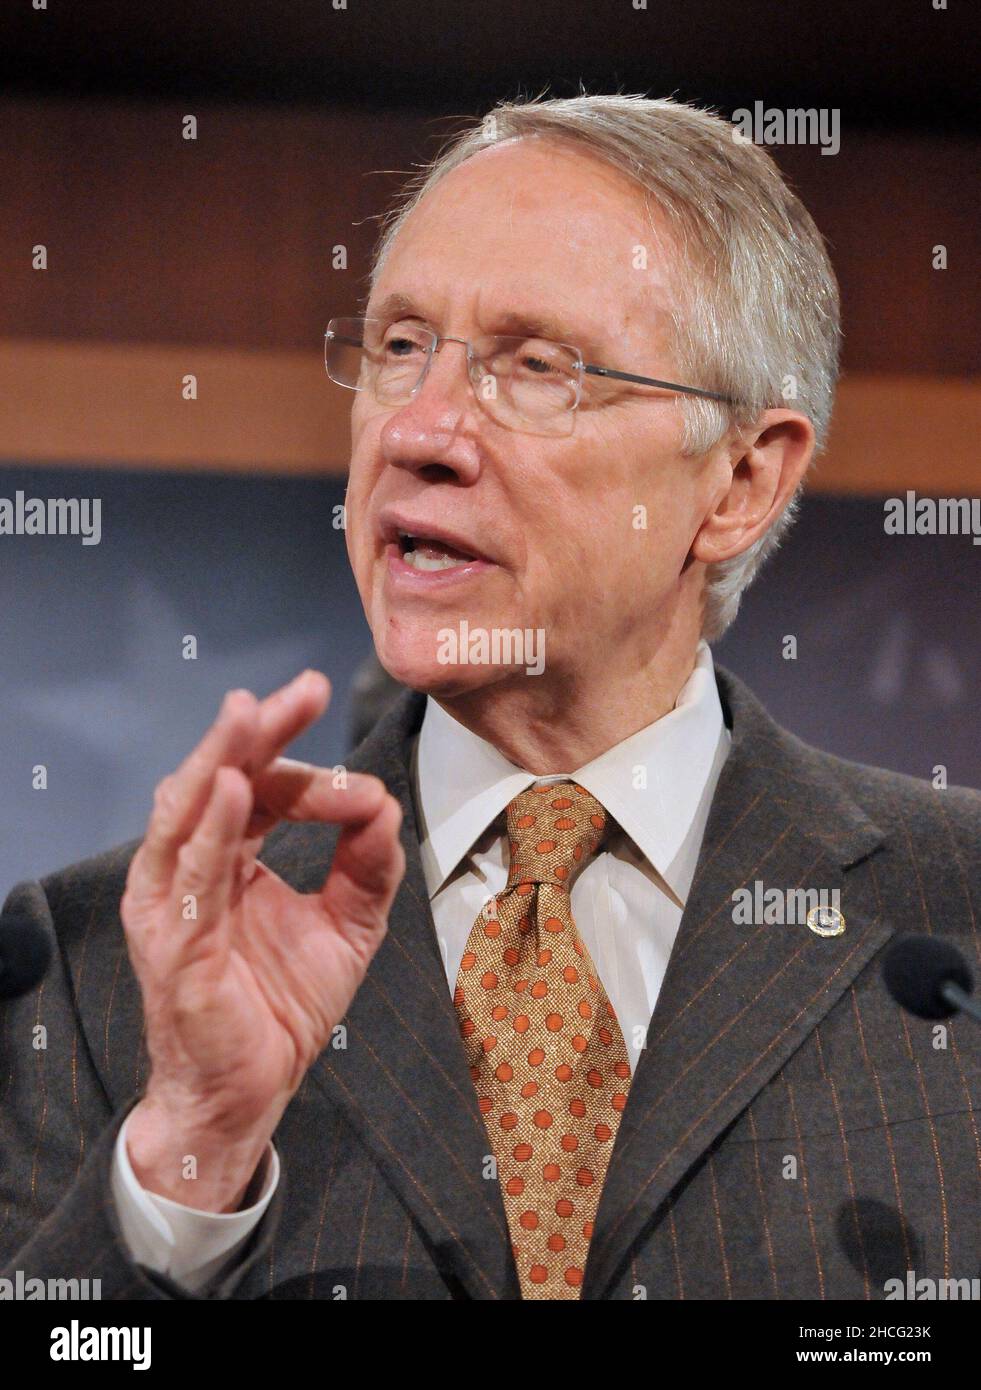 Washington, DC - November 20, 2008 -- United States Senate Majority Leader Harry Reid (Democrat of Nevada) makes remarks as he and other Democratic Leaders conduct a press conference in the United States Capitol on the fate of a proposed 25 billion dollar bail-out of the American Automotive Industry in Washington, DC on Thursday, November 20, 2008. The leaders demanded the Big Three automakers, General Motors, Ford, and Chrysler, develop a plan assuring the money would make them economically viable before approving federal aid.Credit: Ron Sachs/CNP/MediaPunch Stock Photo